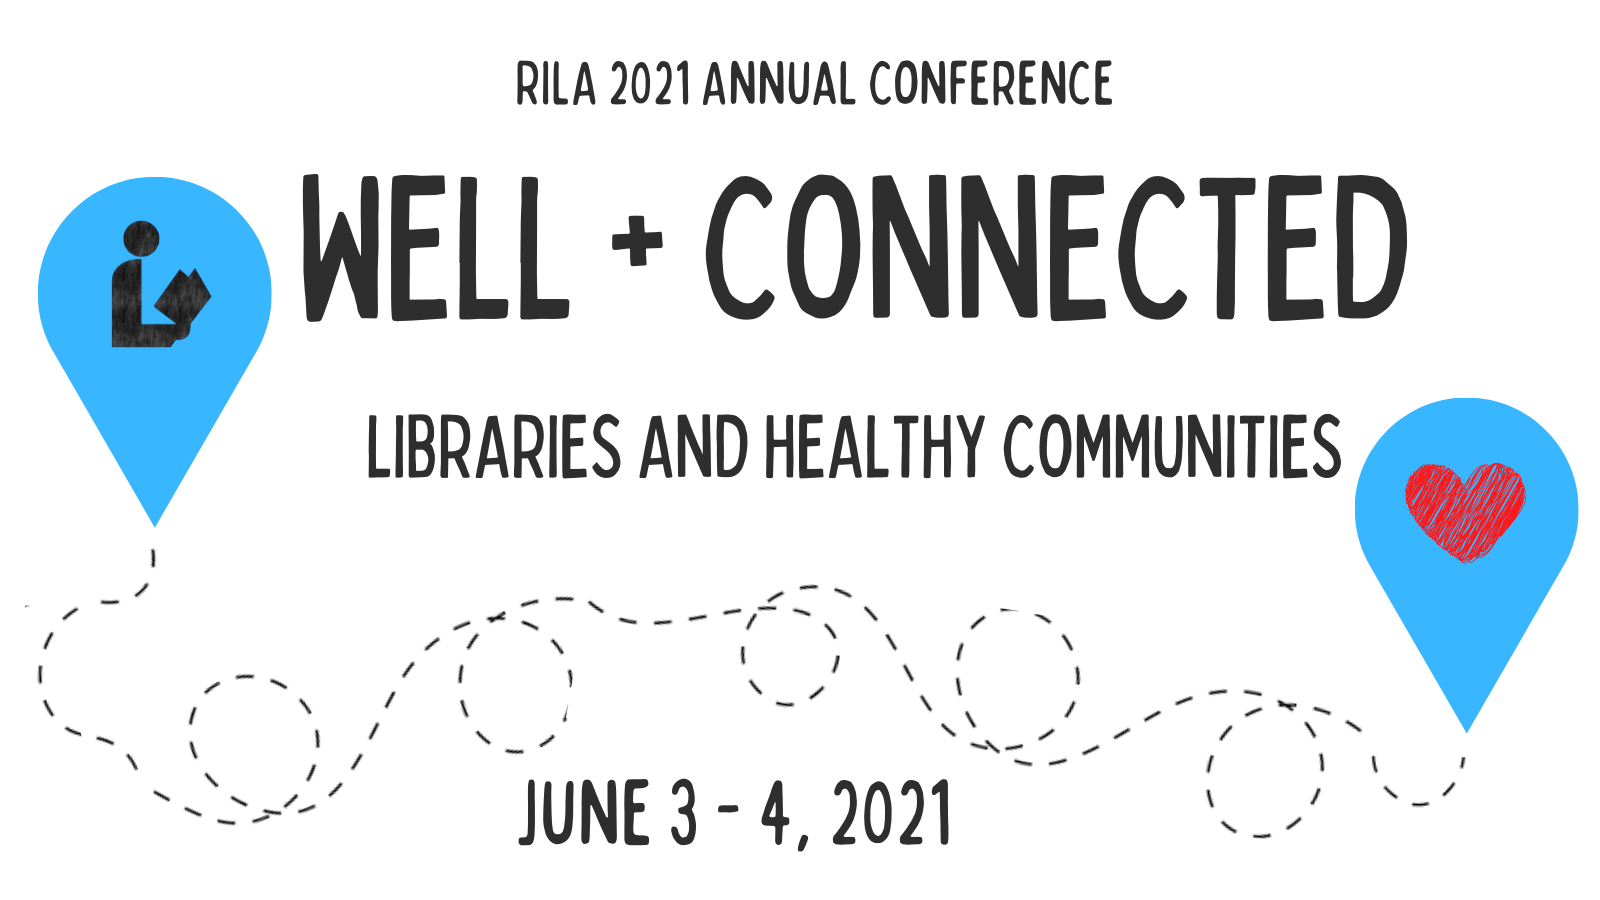 RILA 2021 Annual Conference. Well + Connected: Libraries and Healthy Communities. June 3 - 4, 2021